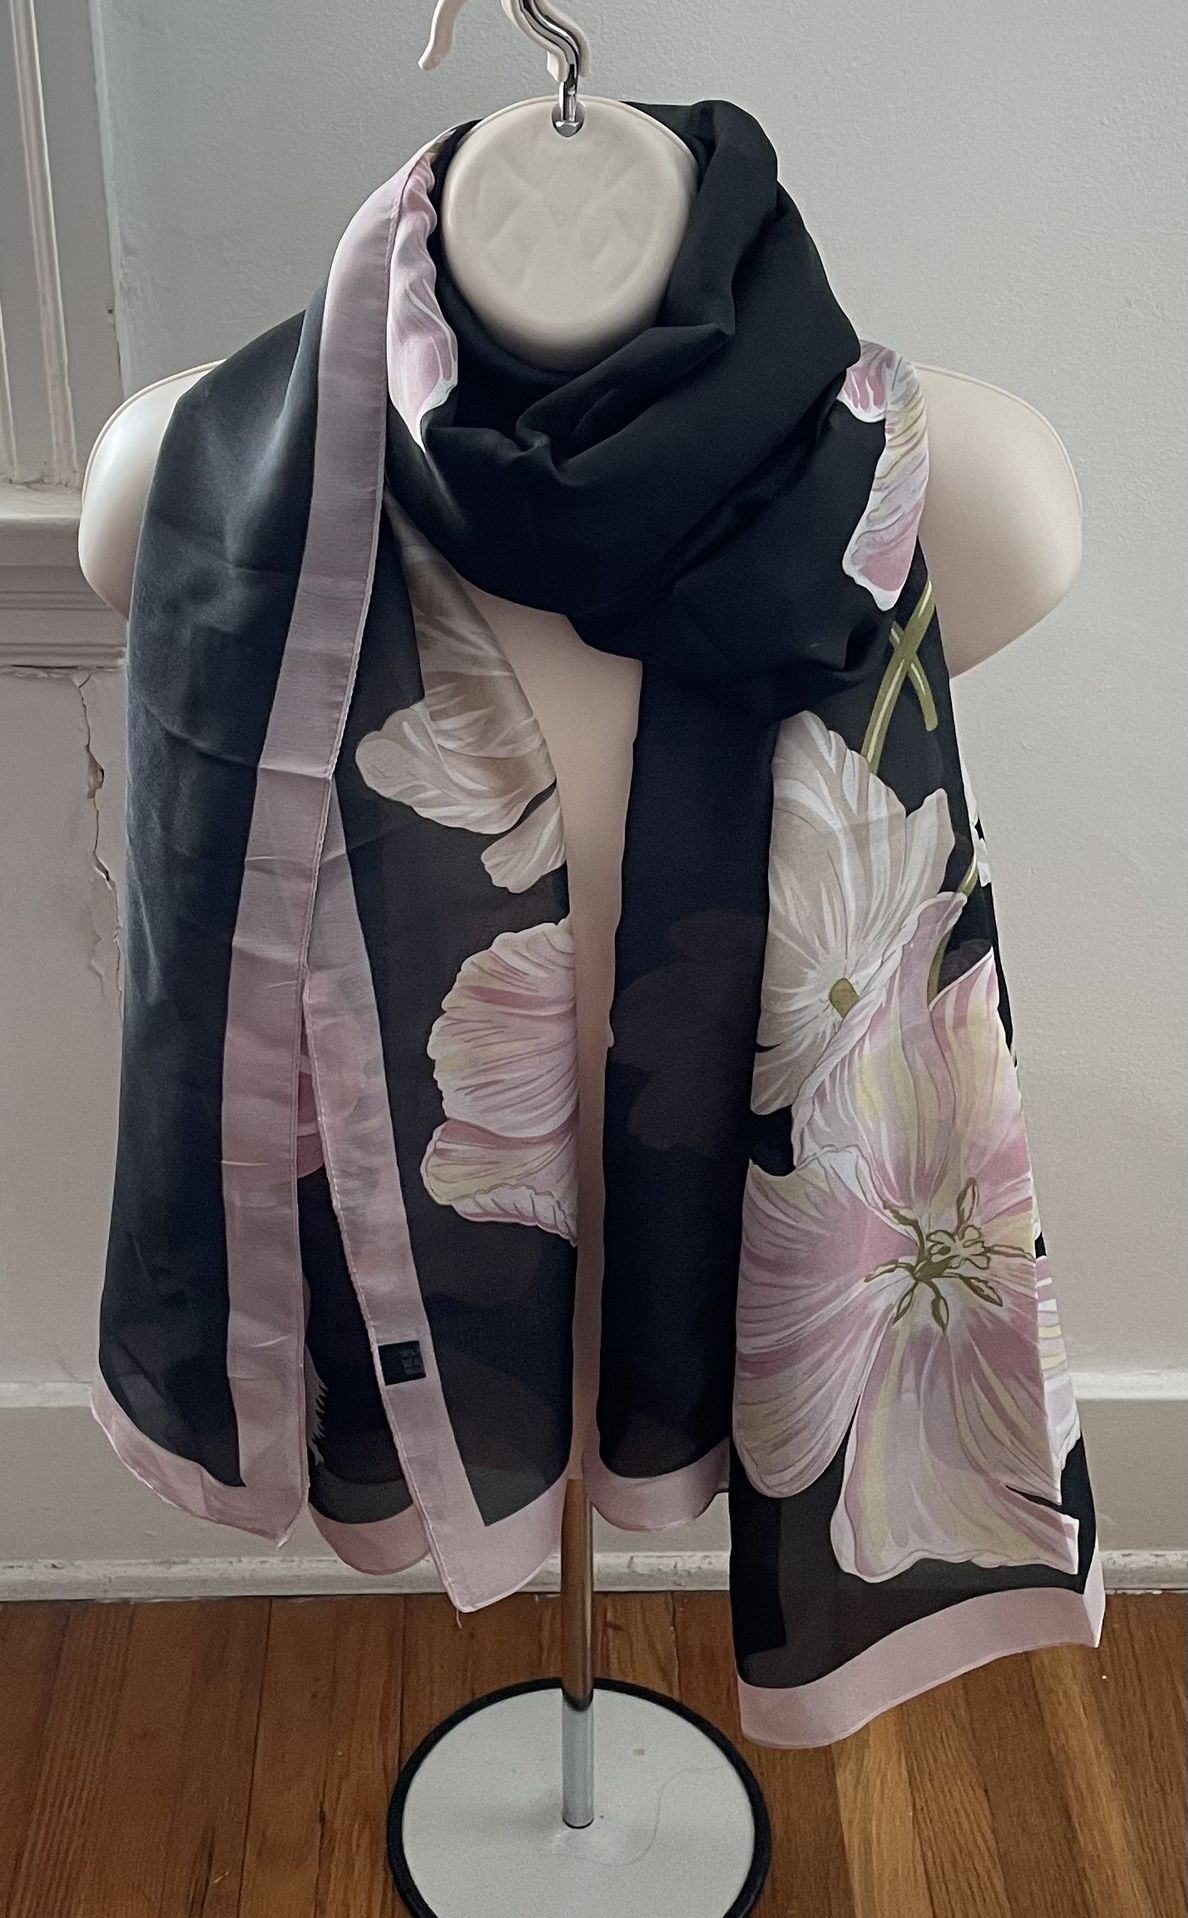 Women’s Black Floral Silky Pink Flowers Scarf Shawl, size 70”x34”